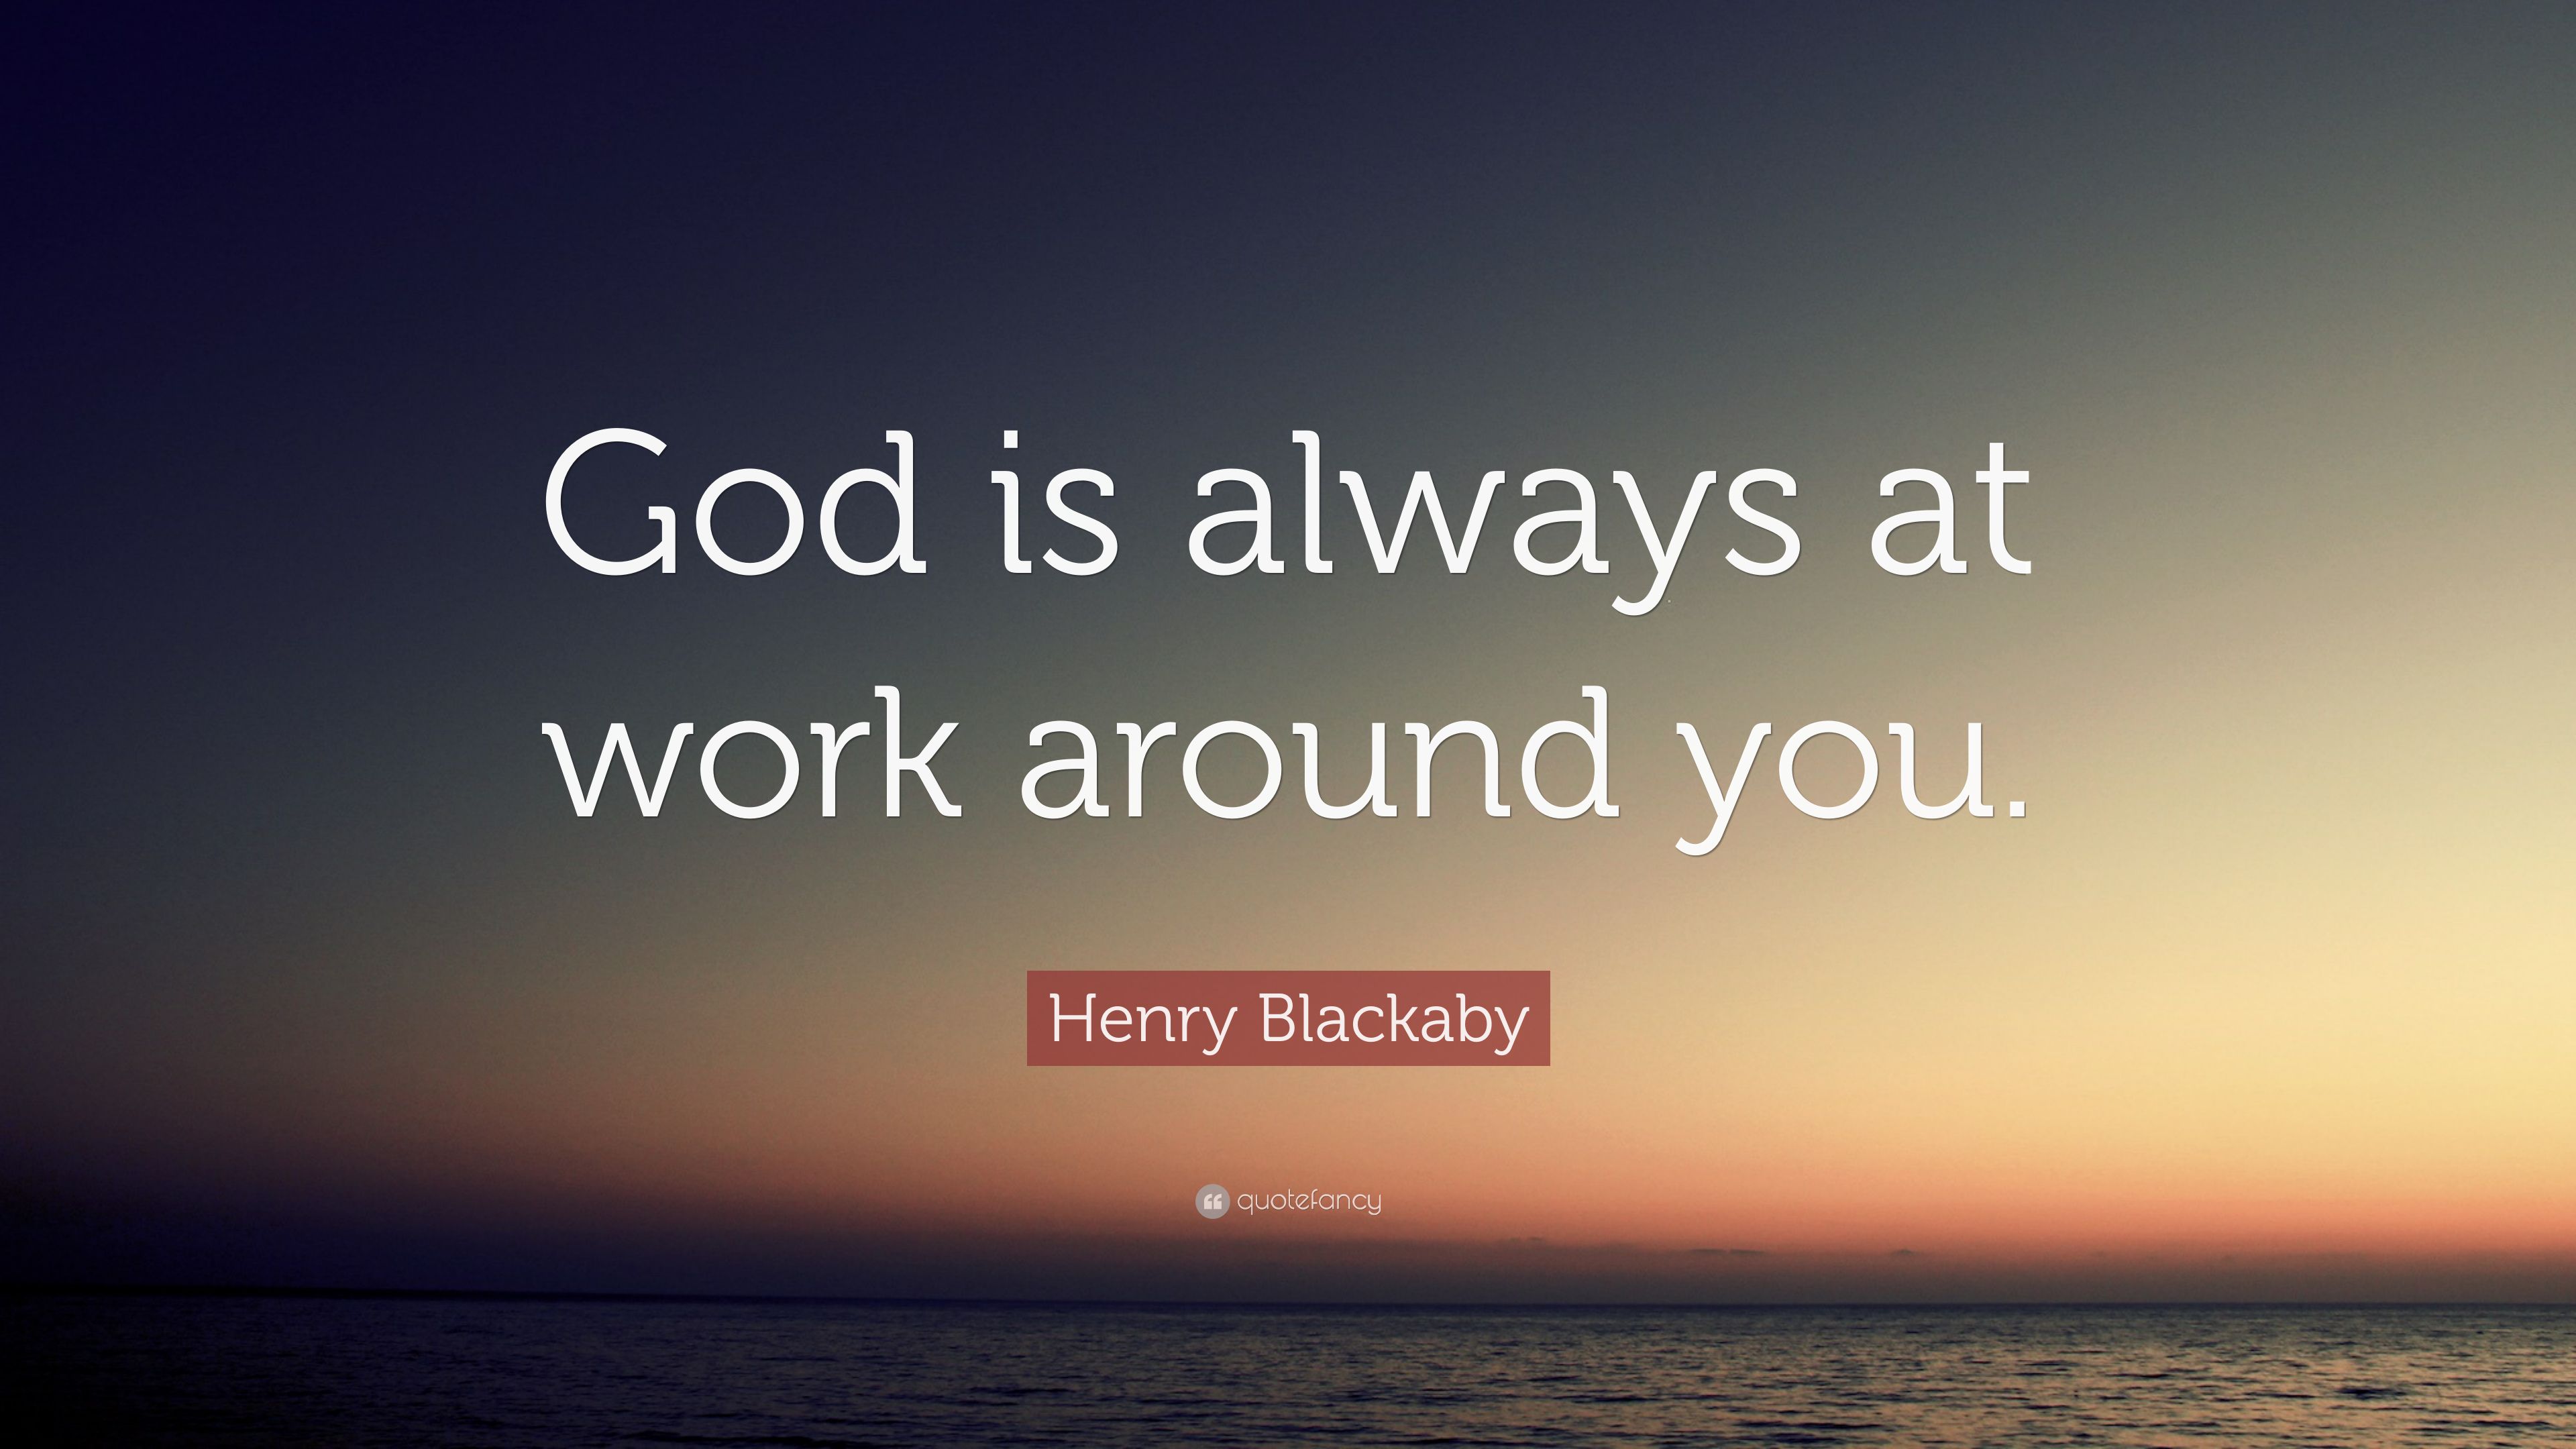 Henry Blackaby Quote: “God is always at work around you.” (7 wallpaper)